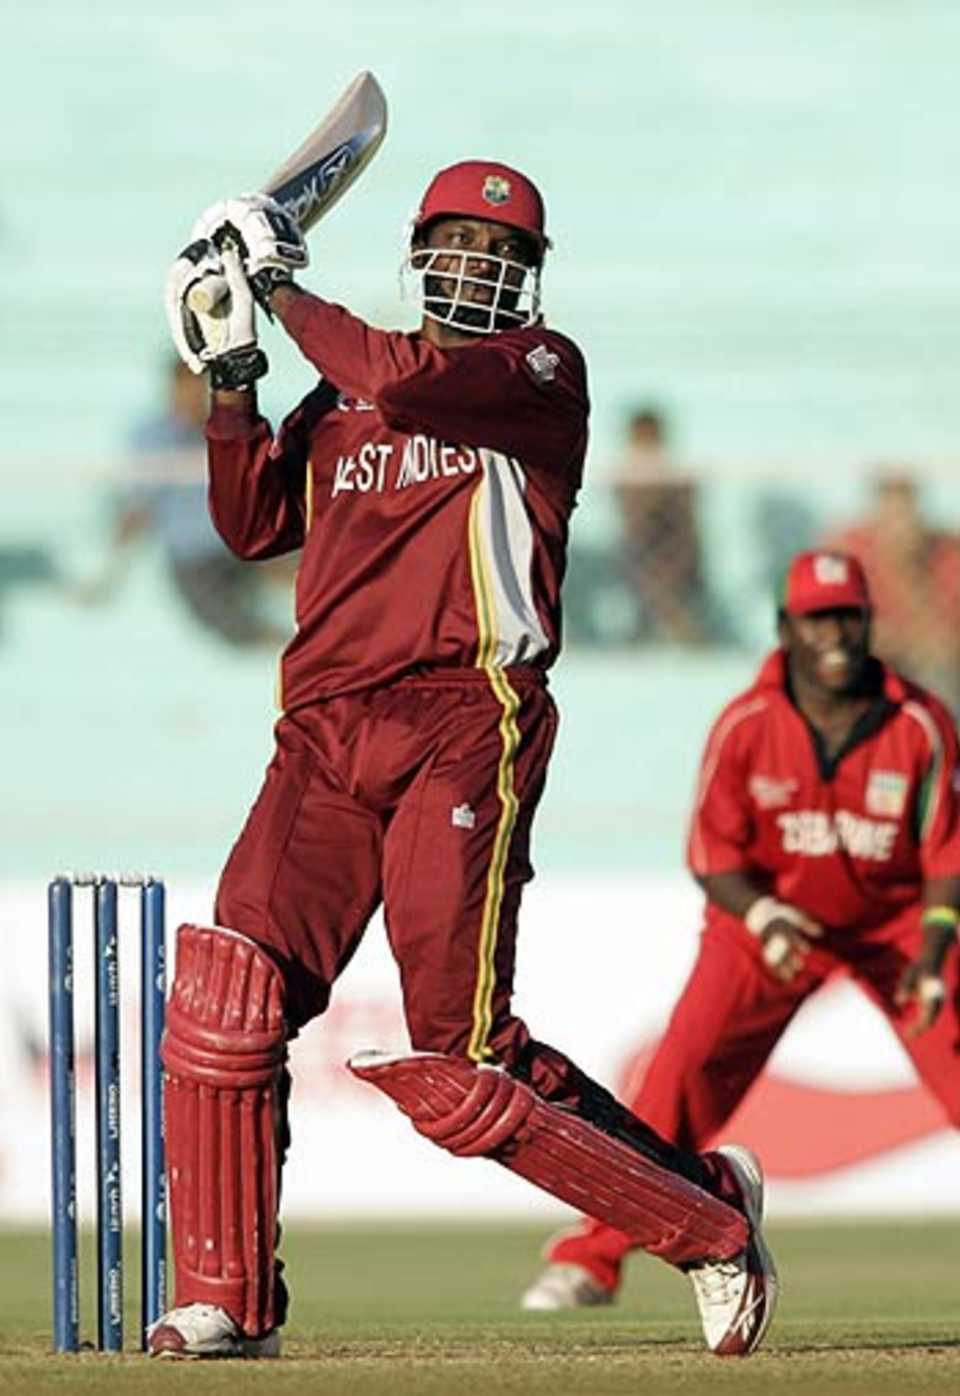 Chris Gayle thwarts a short delivery for a six over long on